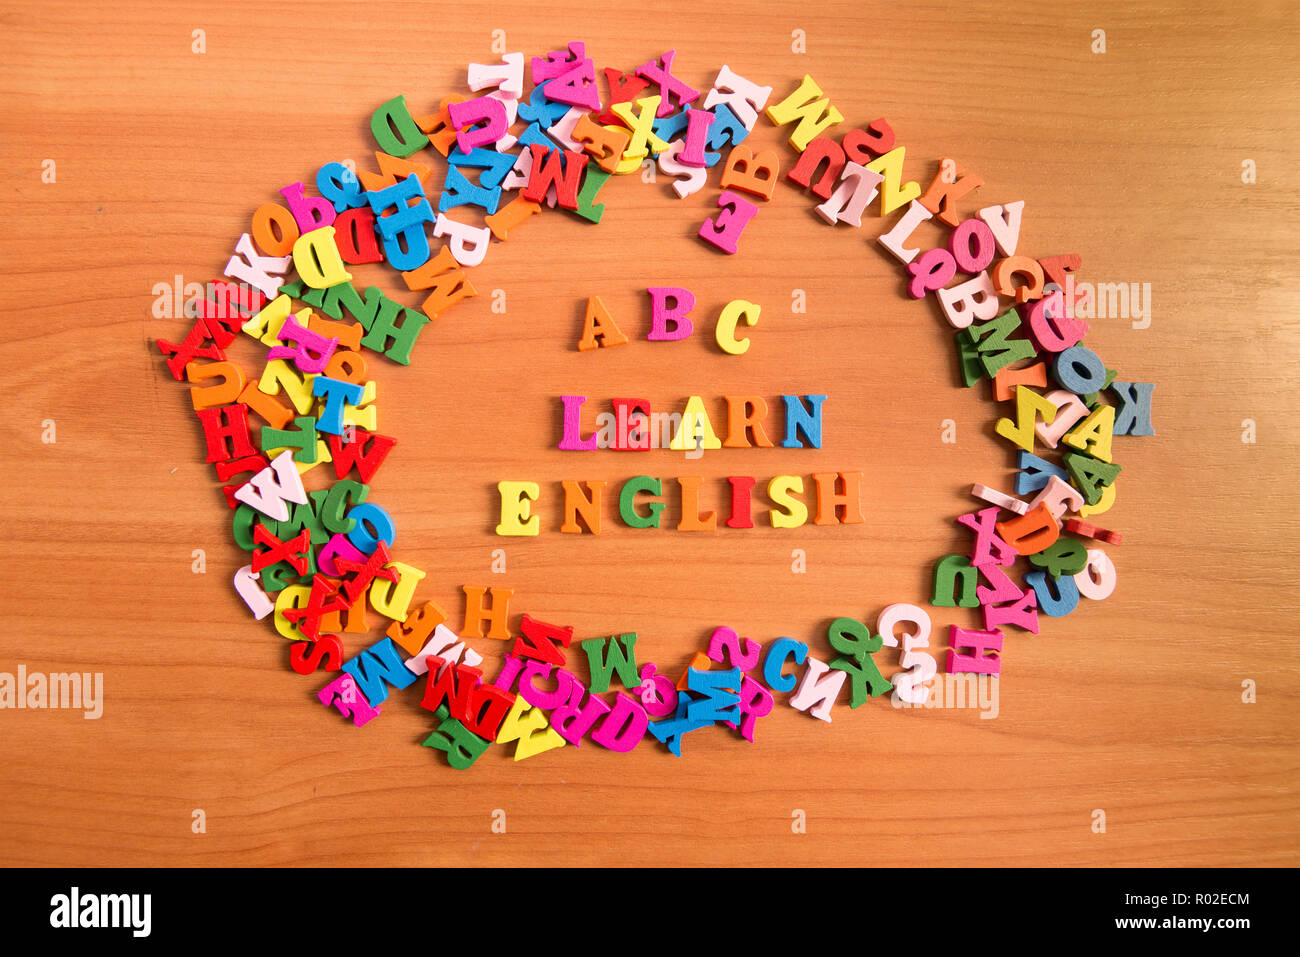 ABC LEARN ENGLISH wooden letters around a pile of other letters over table board surface Stock Photo